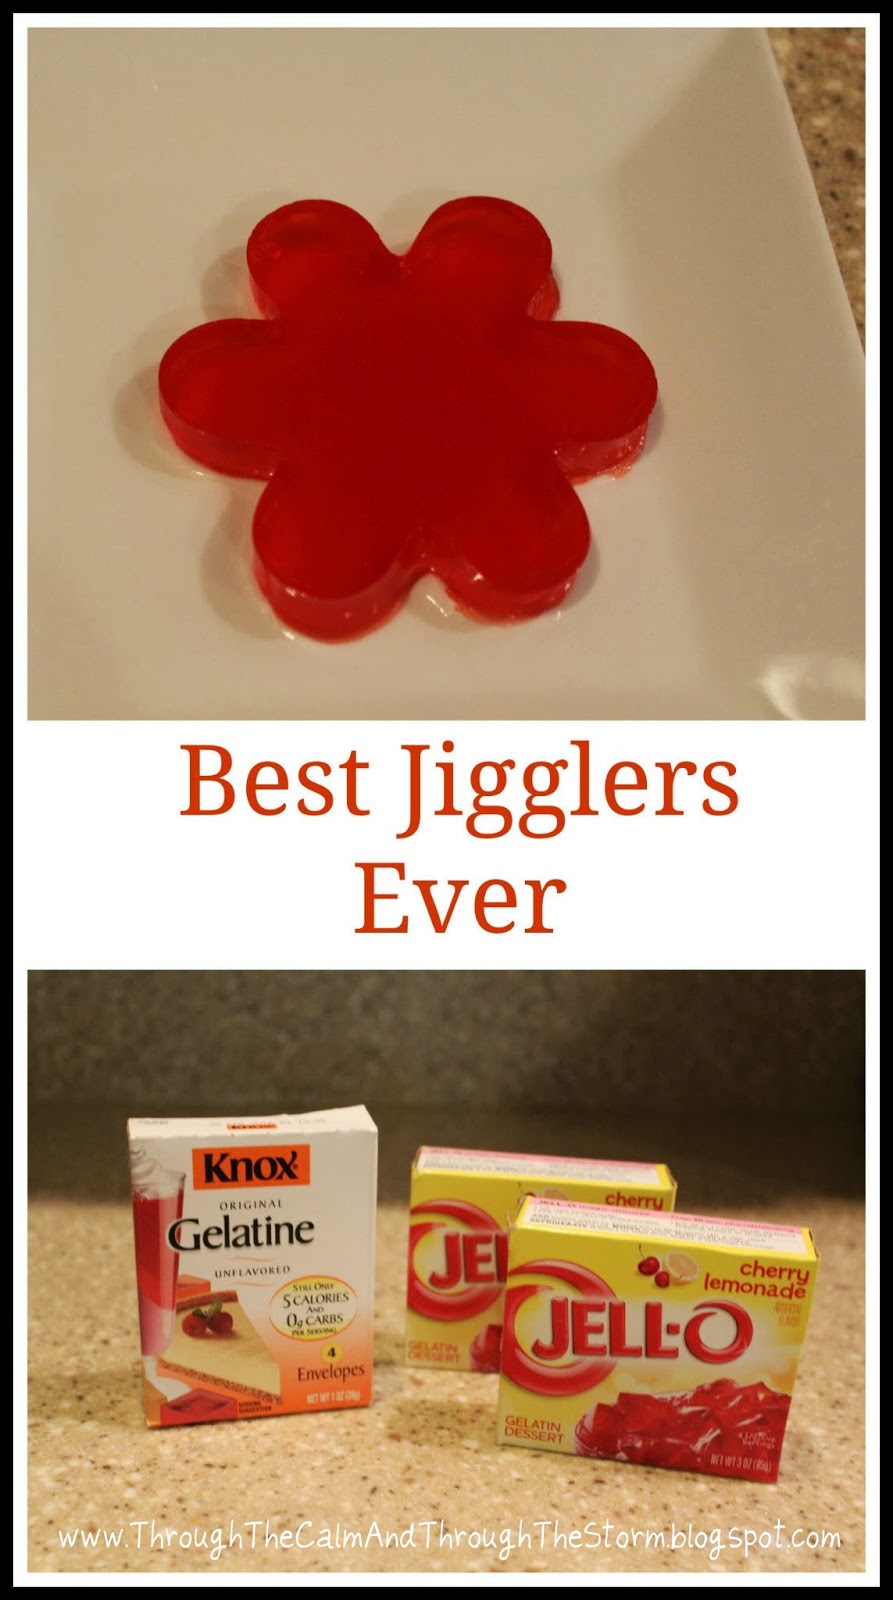 Through the Calm and Through the Storm: Best Jigglers Ever {recipe}